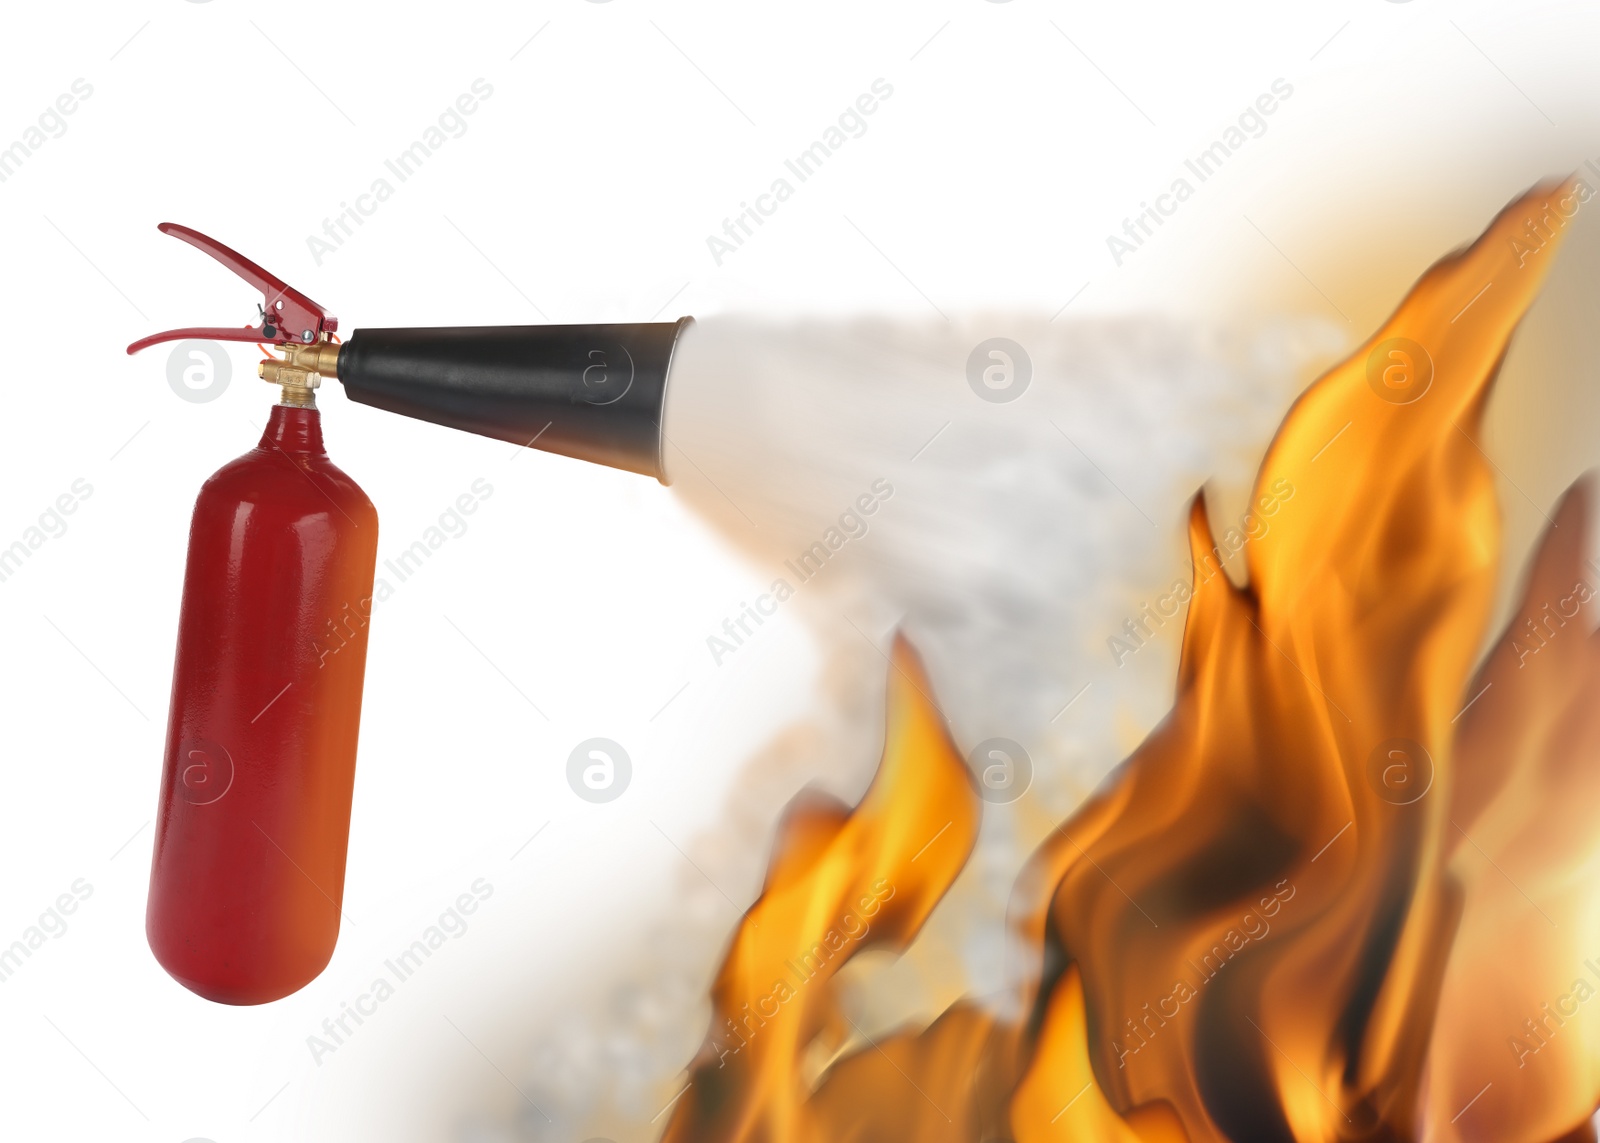 Image of Putting out flame with fire extinguisher on white background